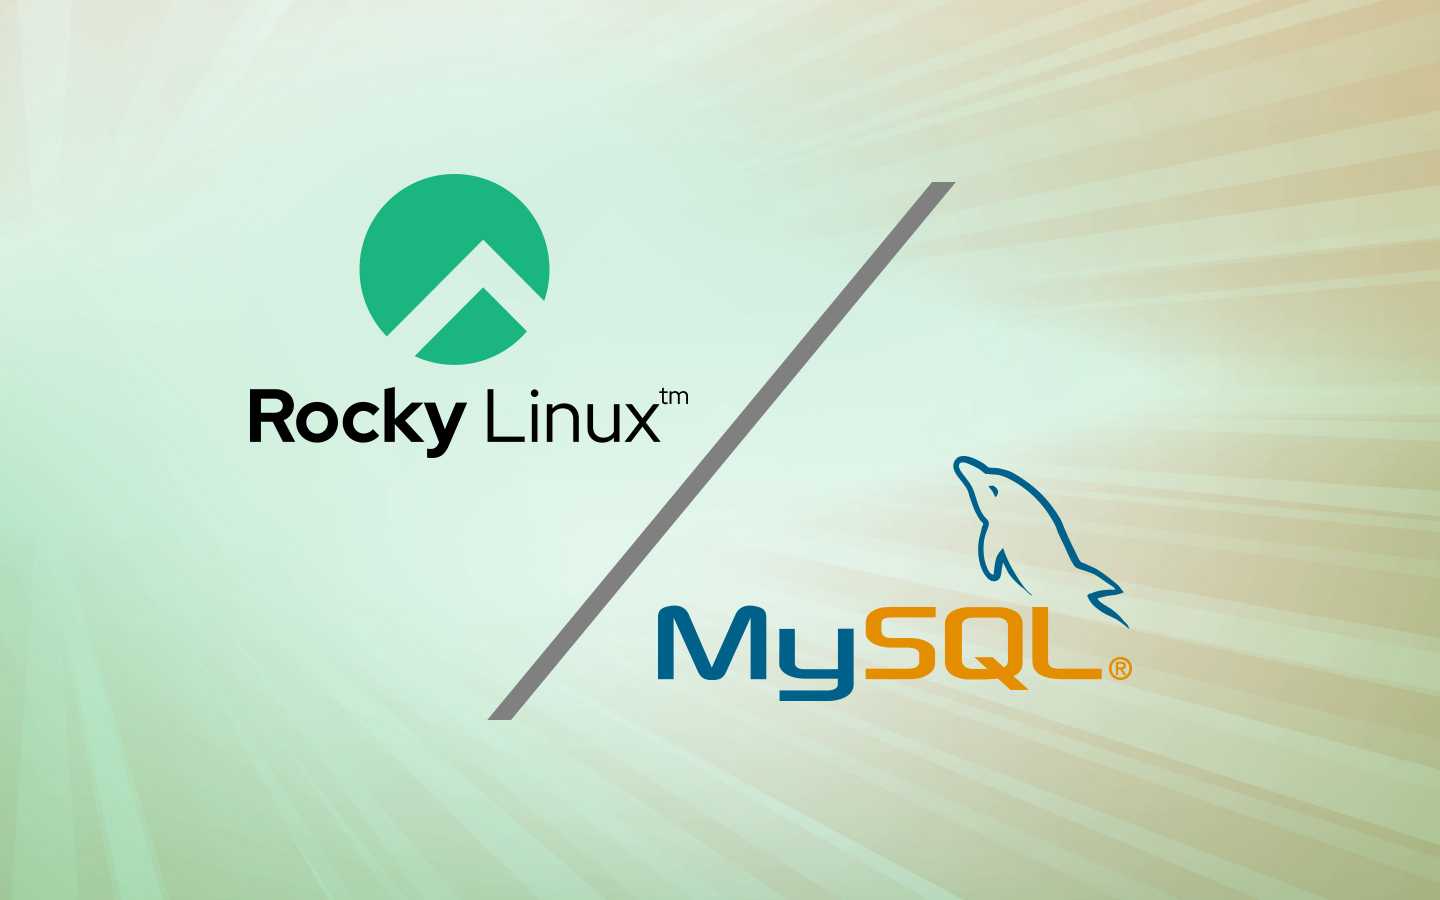 Installing MySQL Server on Rocky Linux and Enabling Remote Access